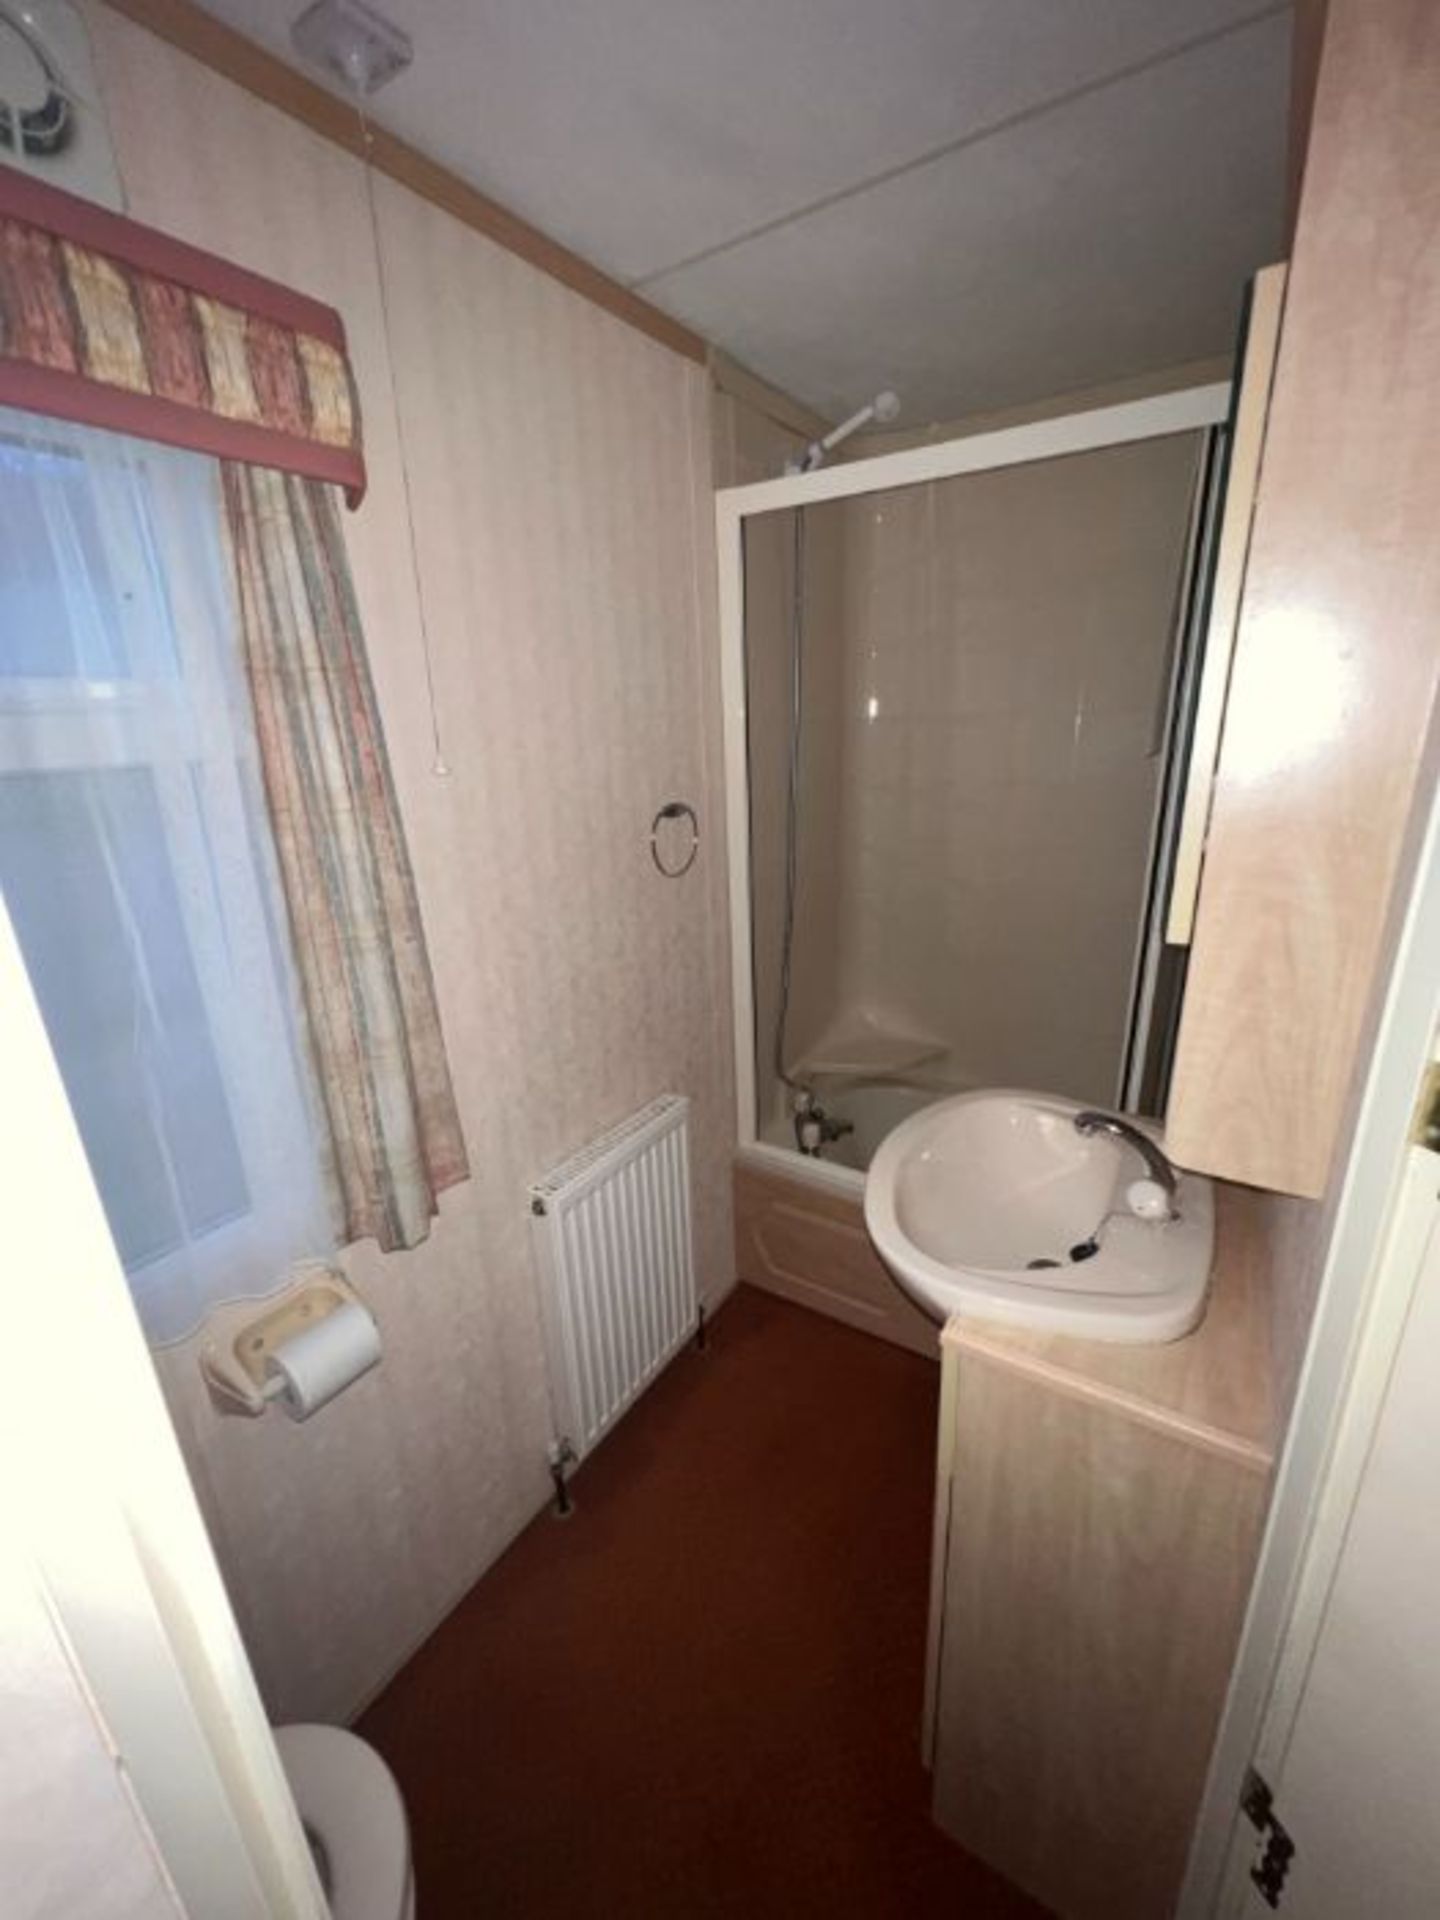 WILLERBY LYNDHURST 37FT X 12FT, 2 BEDROOM STATIC CARAVAN DOUBLE GLAZED & CENTRAL HEATING - LOCATED - Image 46 of 50